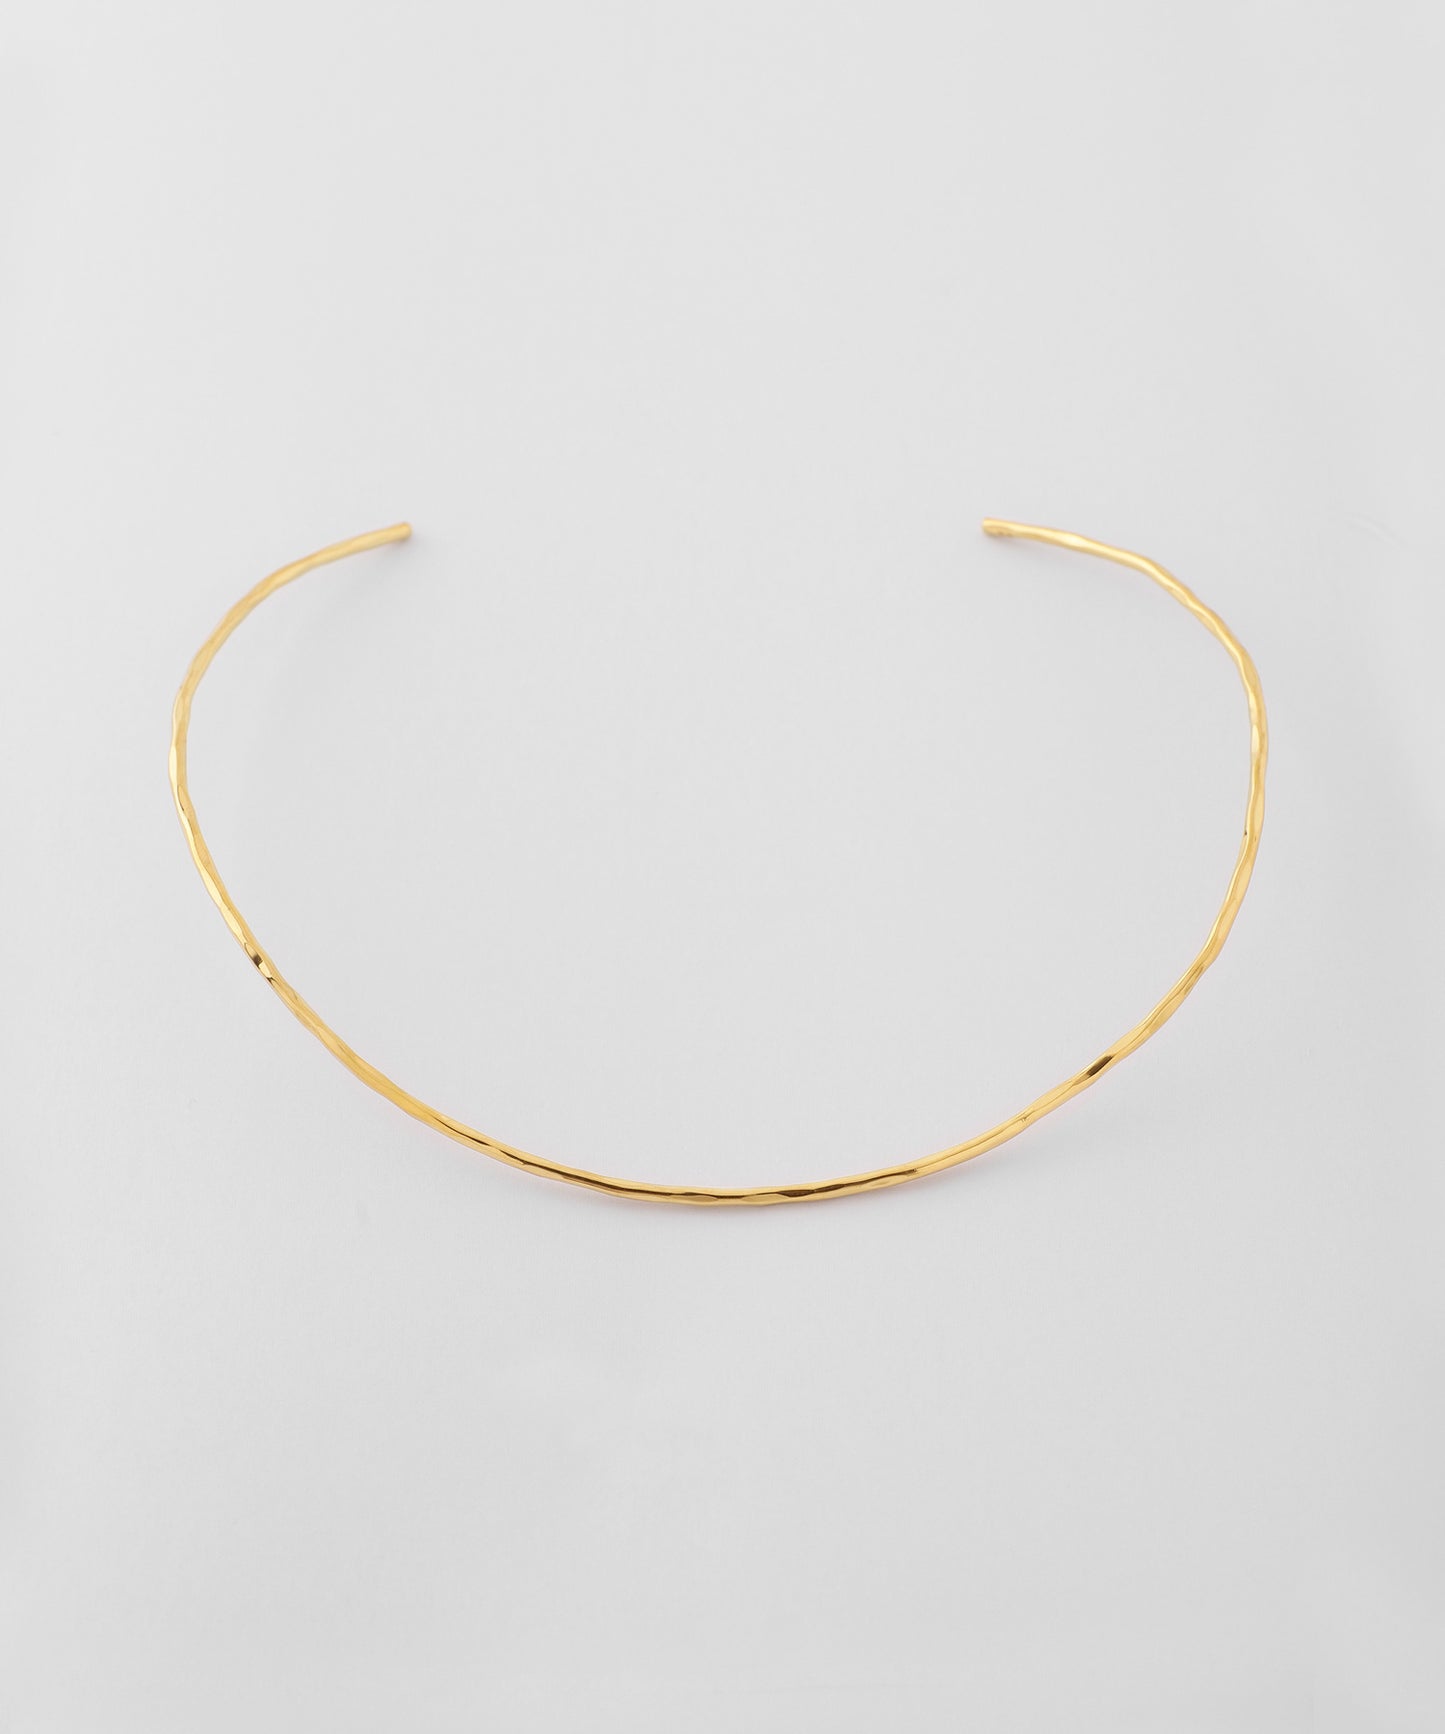 【Stainless Seel IP】Crafted Metal Choker